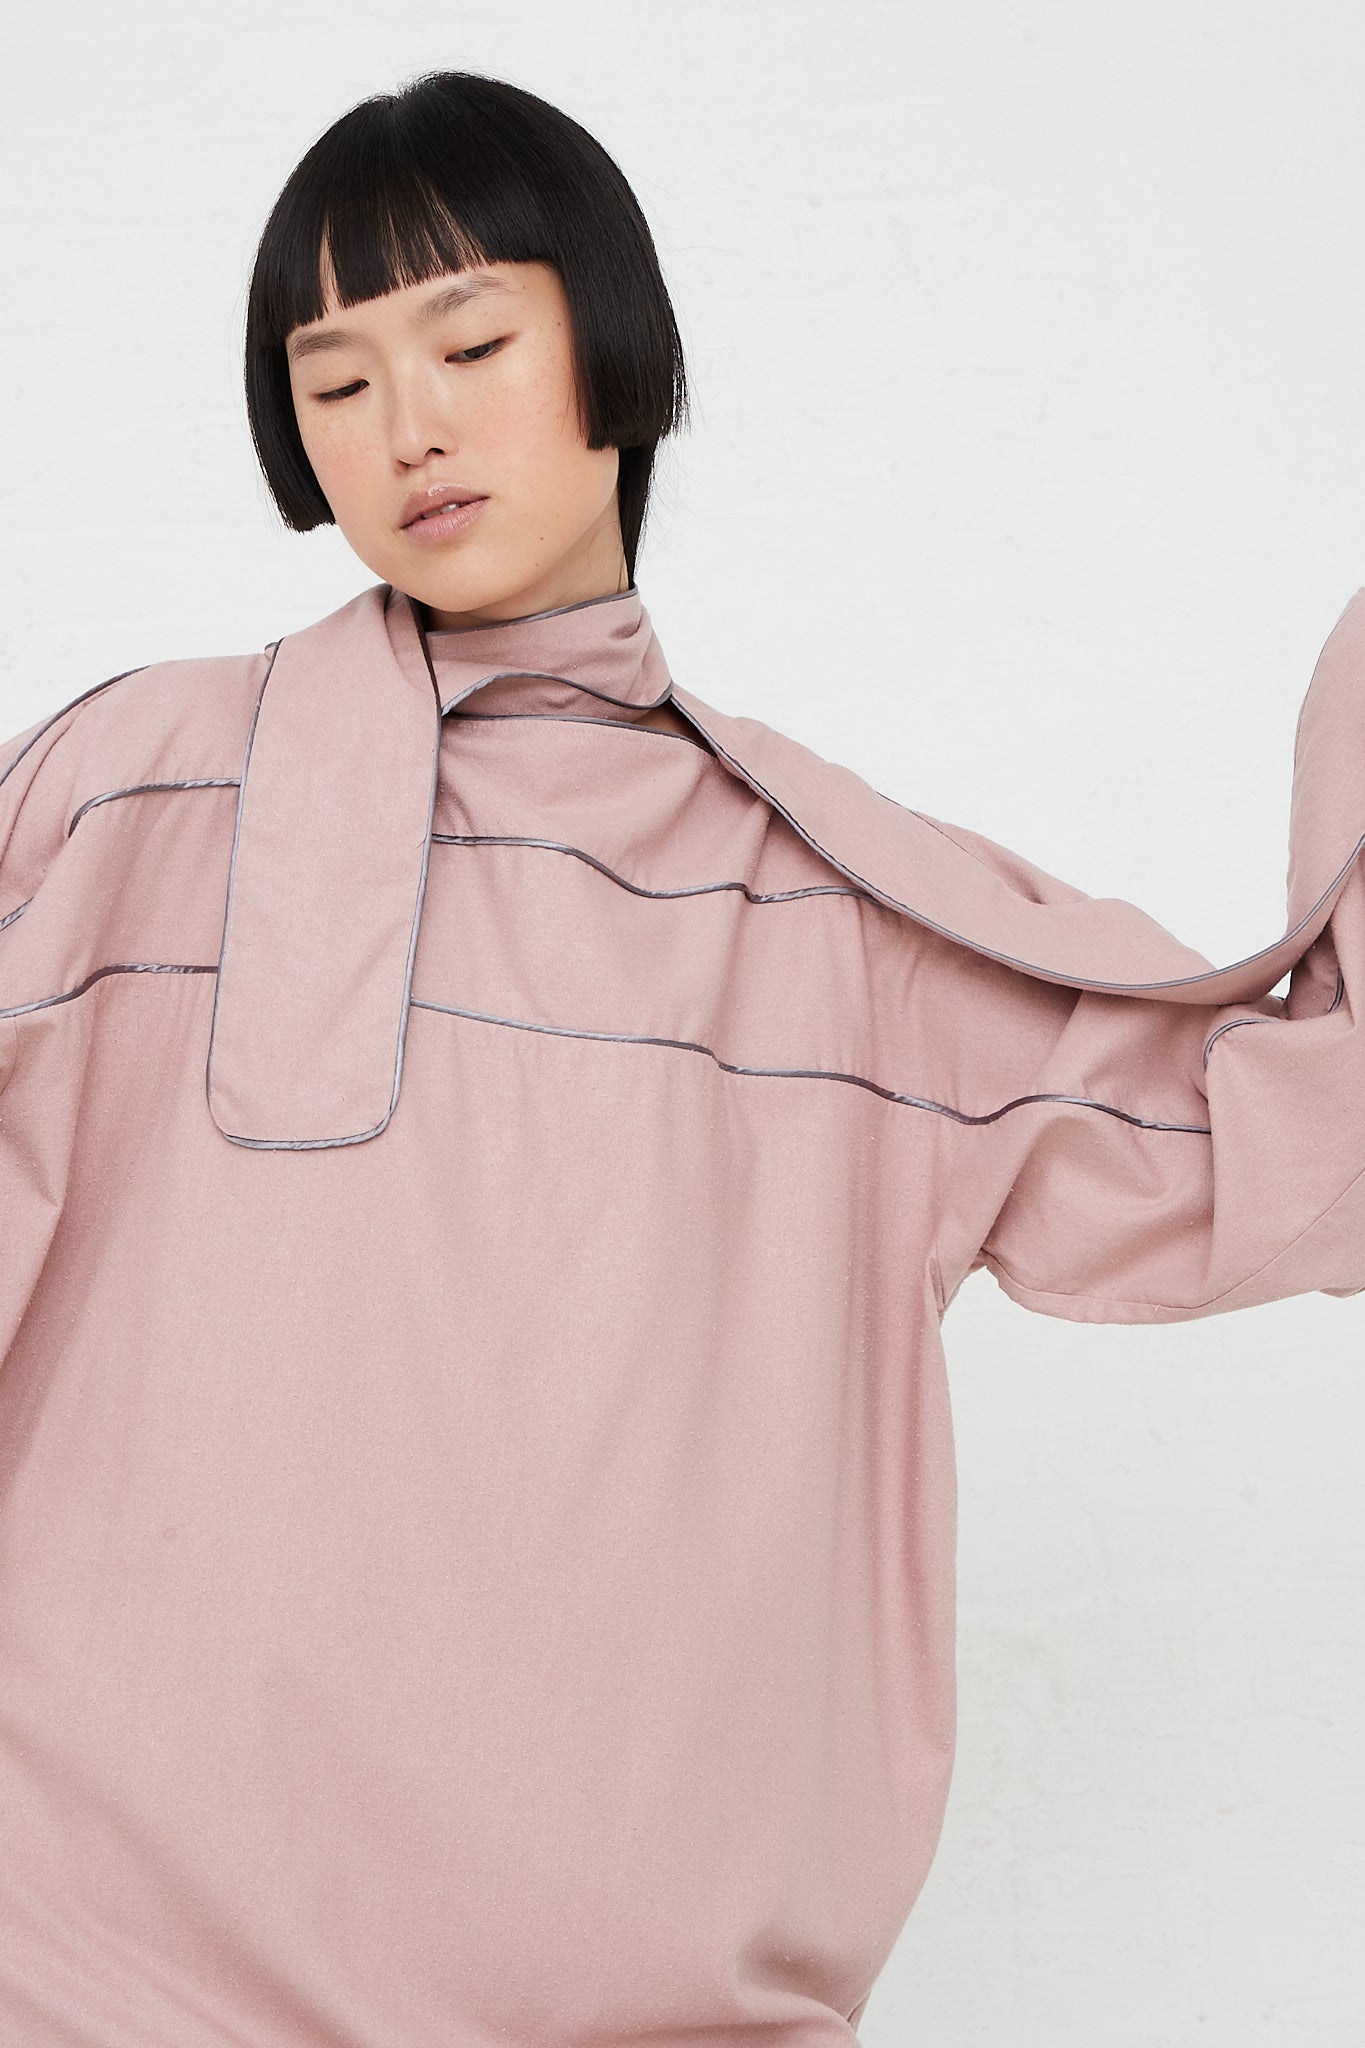 Lesie Silk Dress in Pompei Rose by Baserange for Oroboro Front Upclose